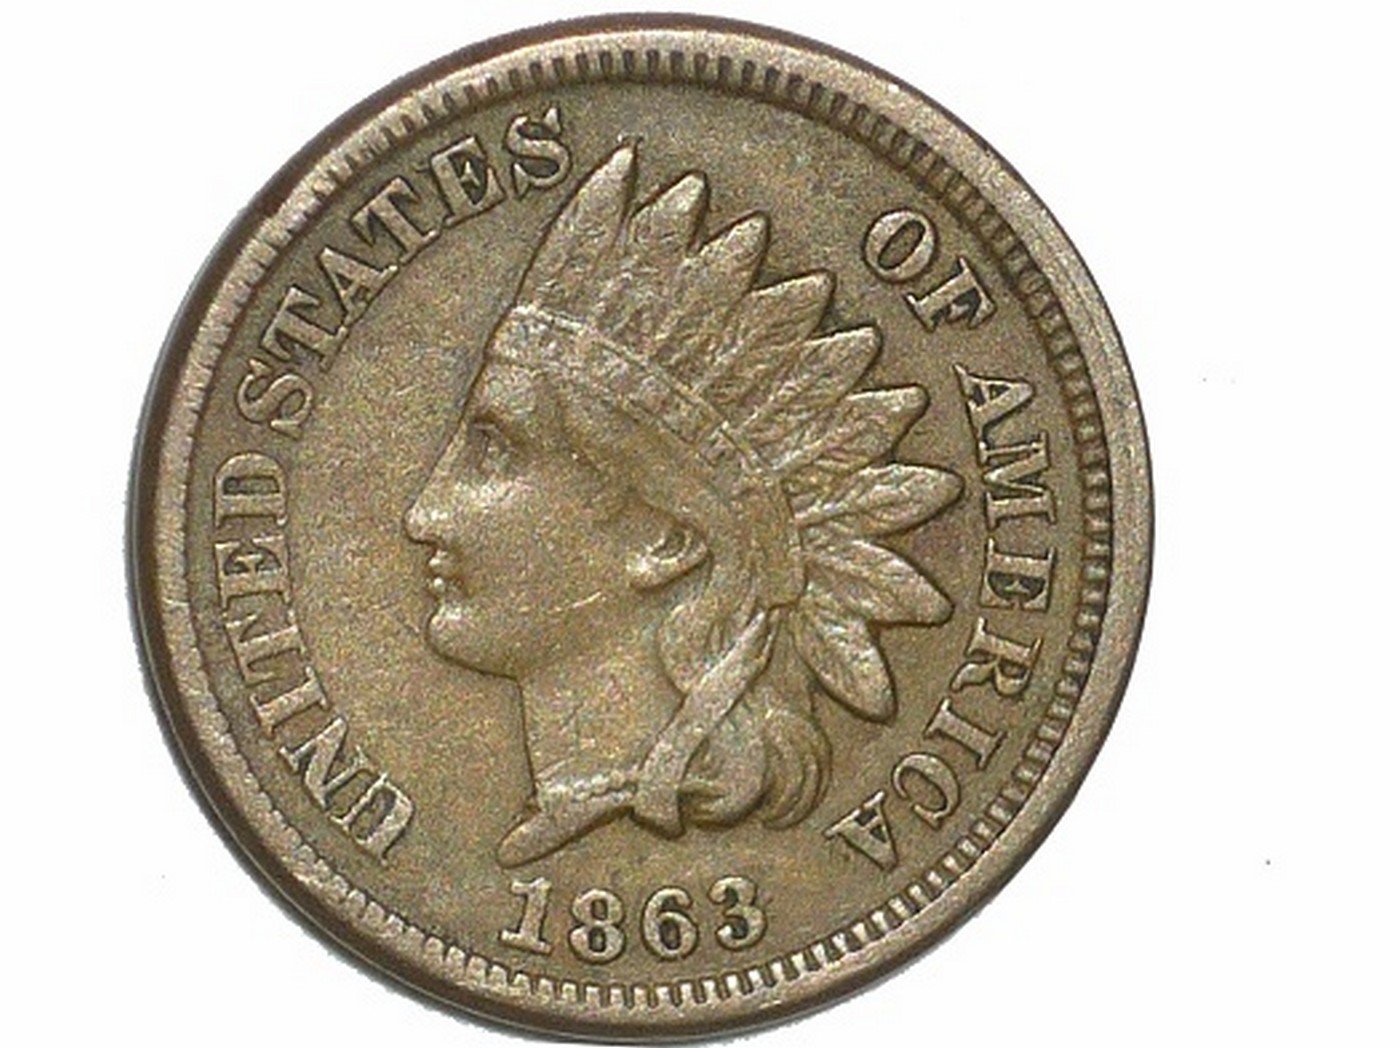 1863 Obverse of CRK-003 - Indian Head Penny - Photo by David Poliquin